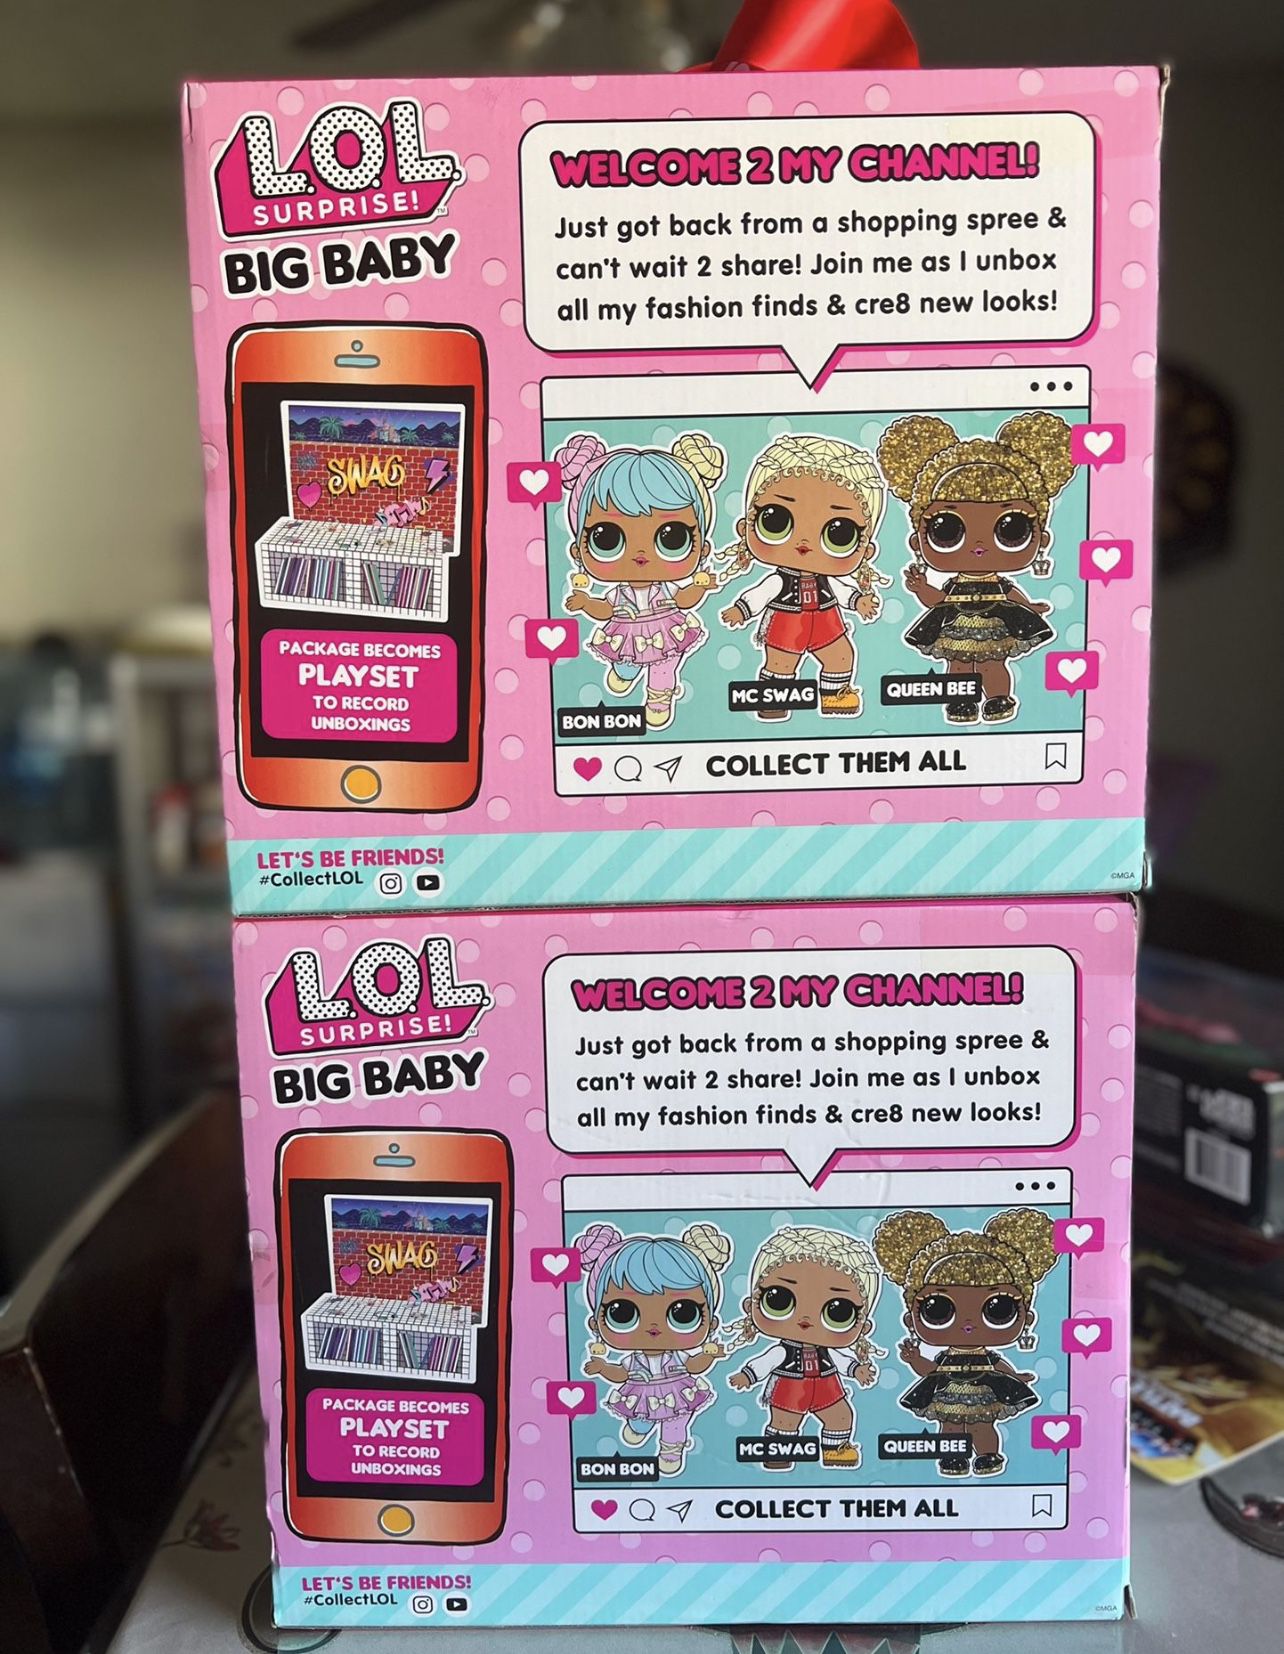 LOL Surprise Big Baby MC Swag 11” Baby Doll with Colorful Surprises